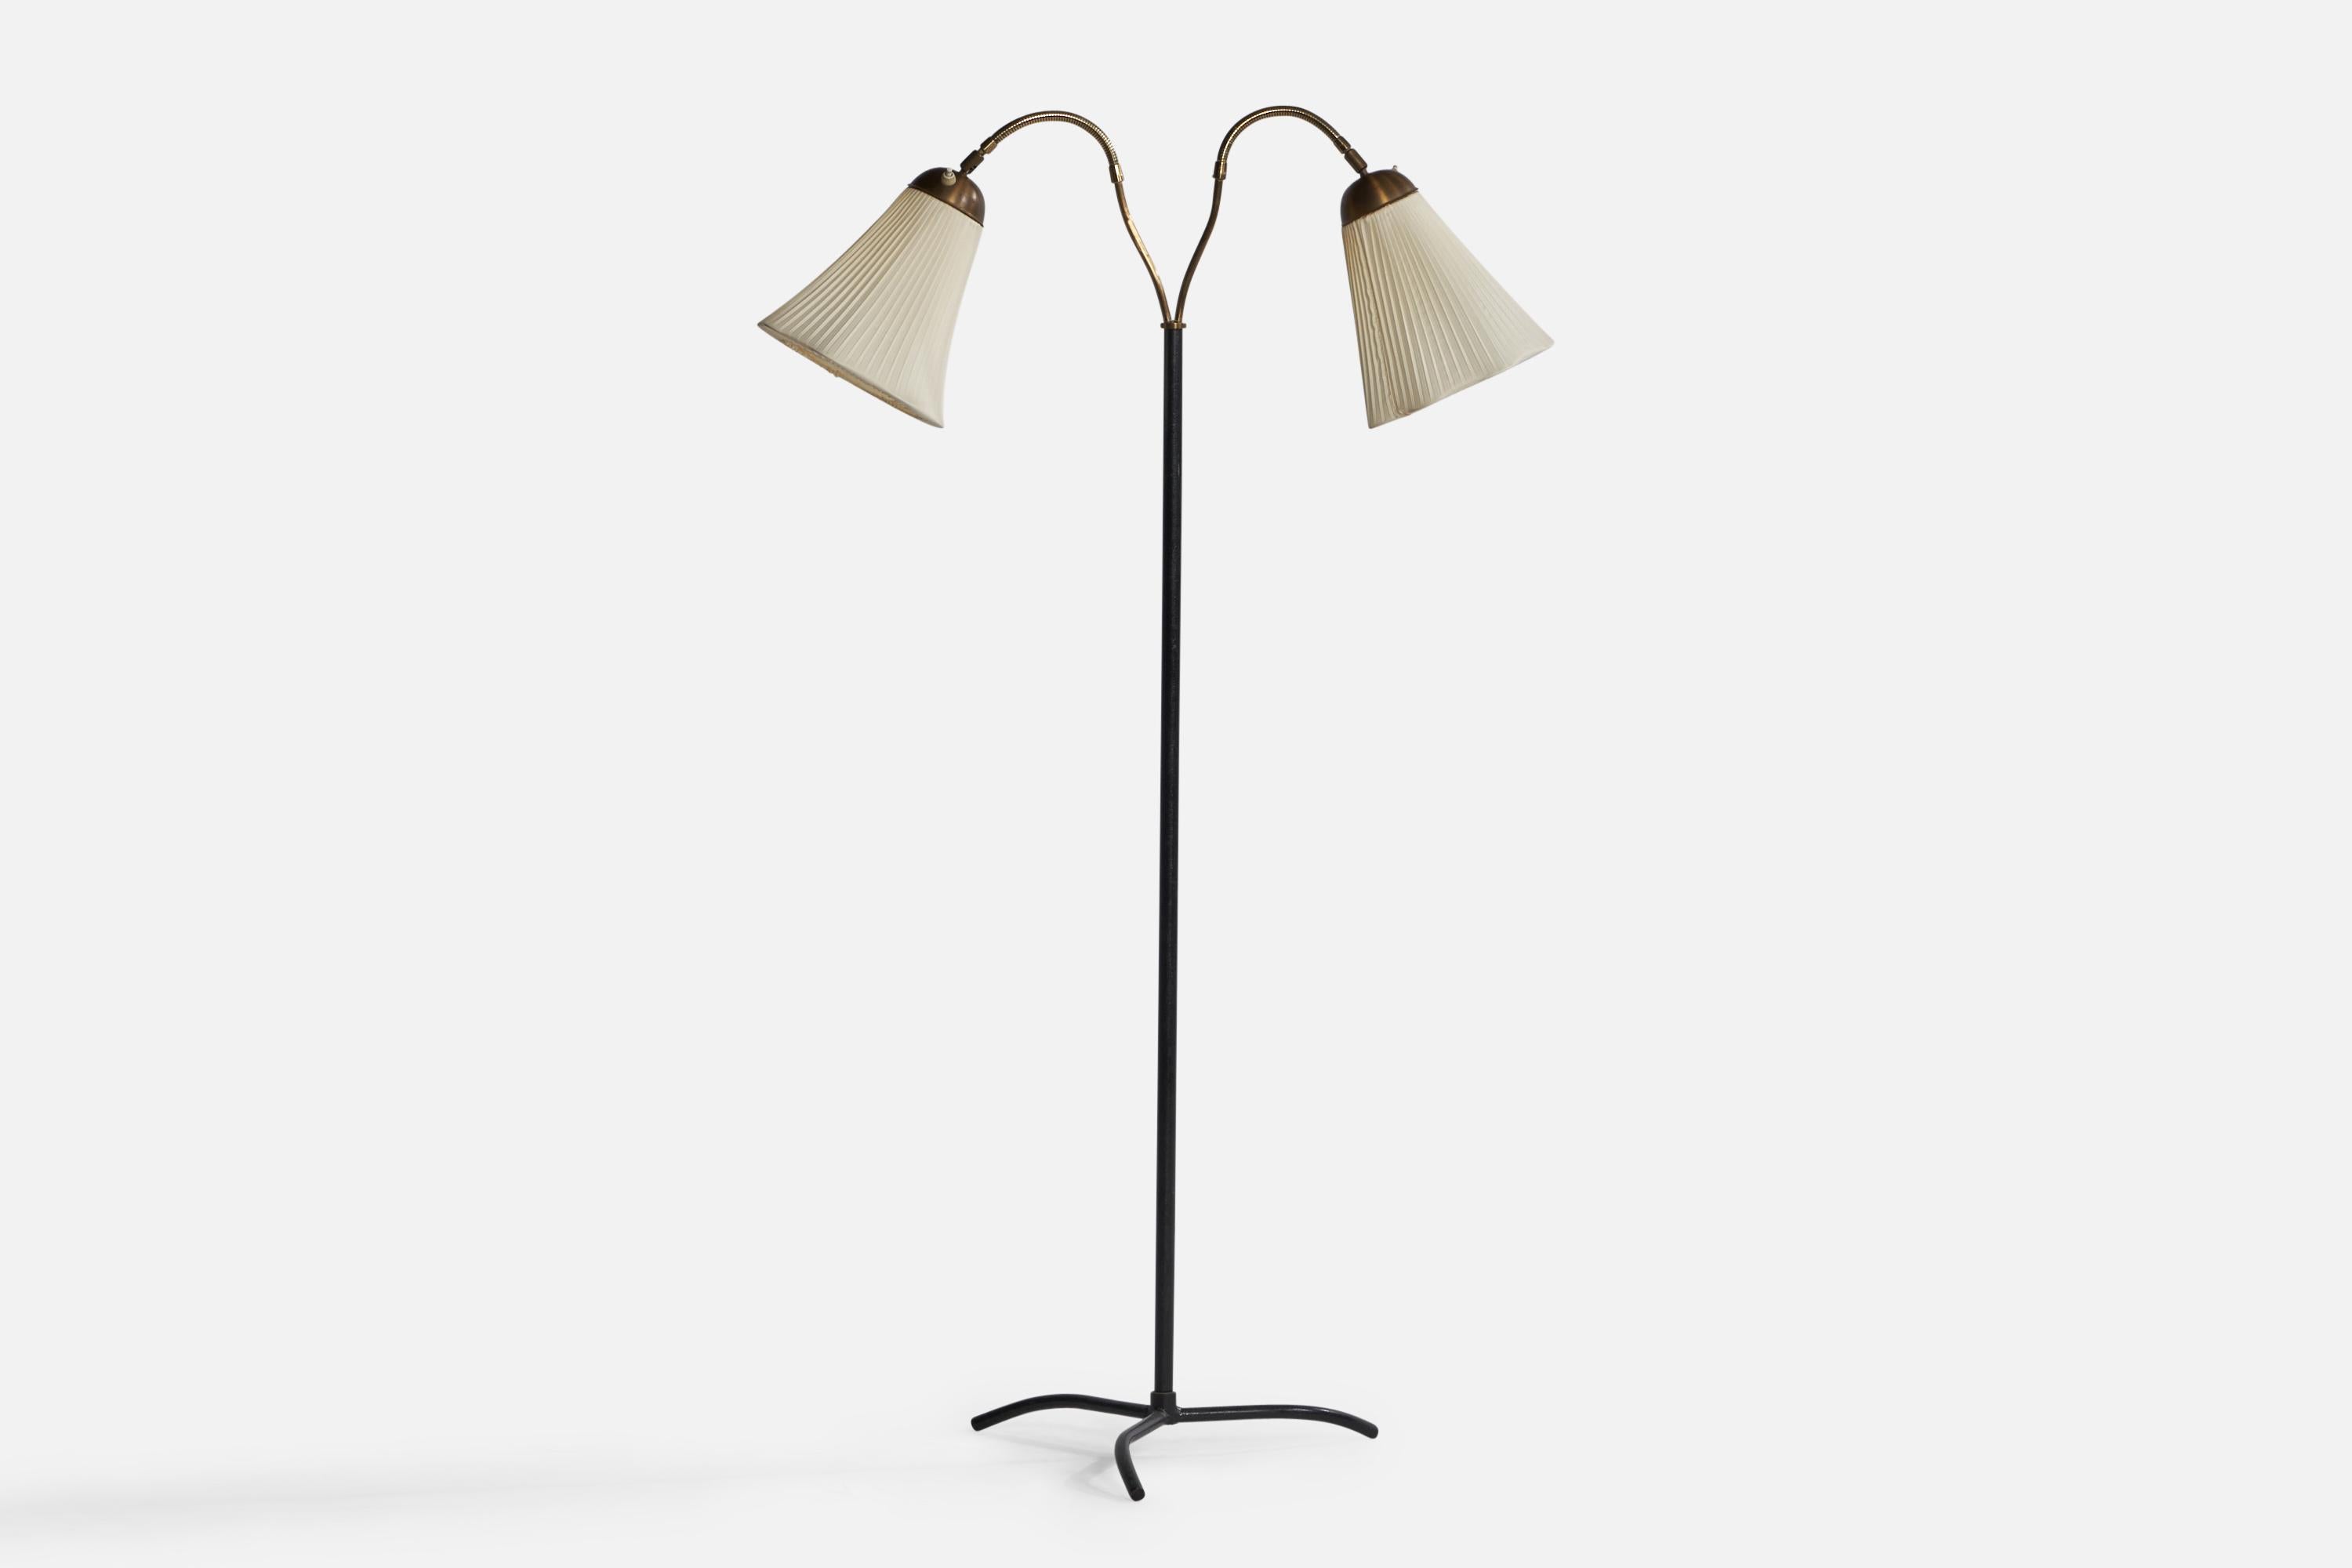 A brass, black-lacquered metal and fabric floor lamp designed and produced by AJH Belysning, Sweden, 1940s.

Overall Dimensions (inches): 57” H x 36” W x 24” D. Stated dimensions include shades.
Dimensions vary based on positions of lights.
Bulb